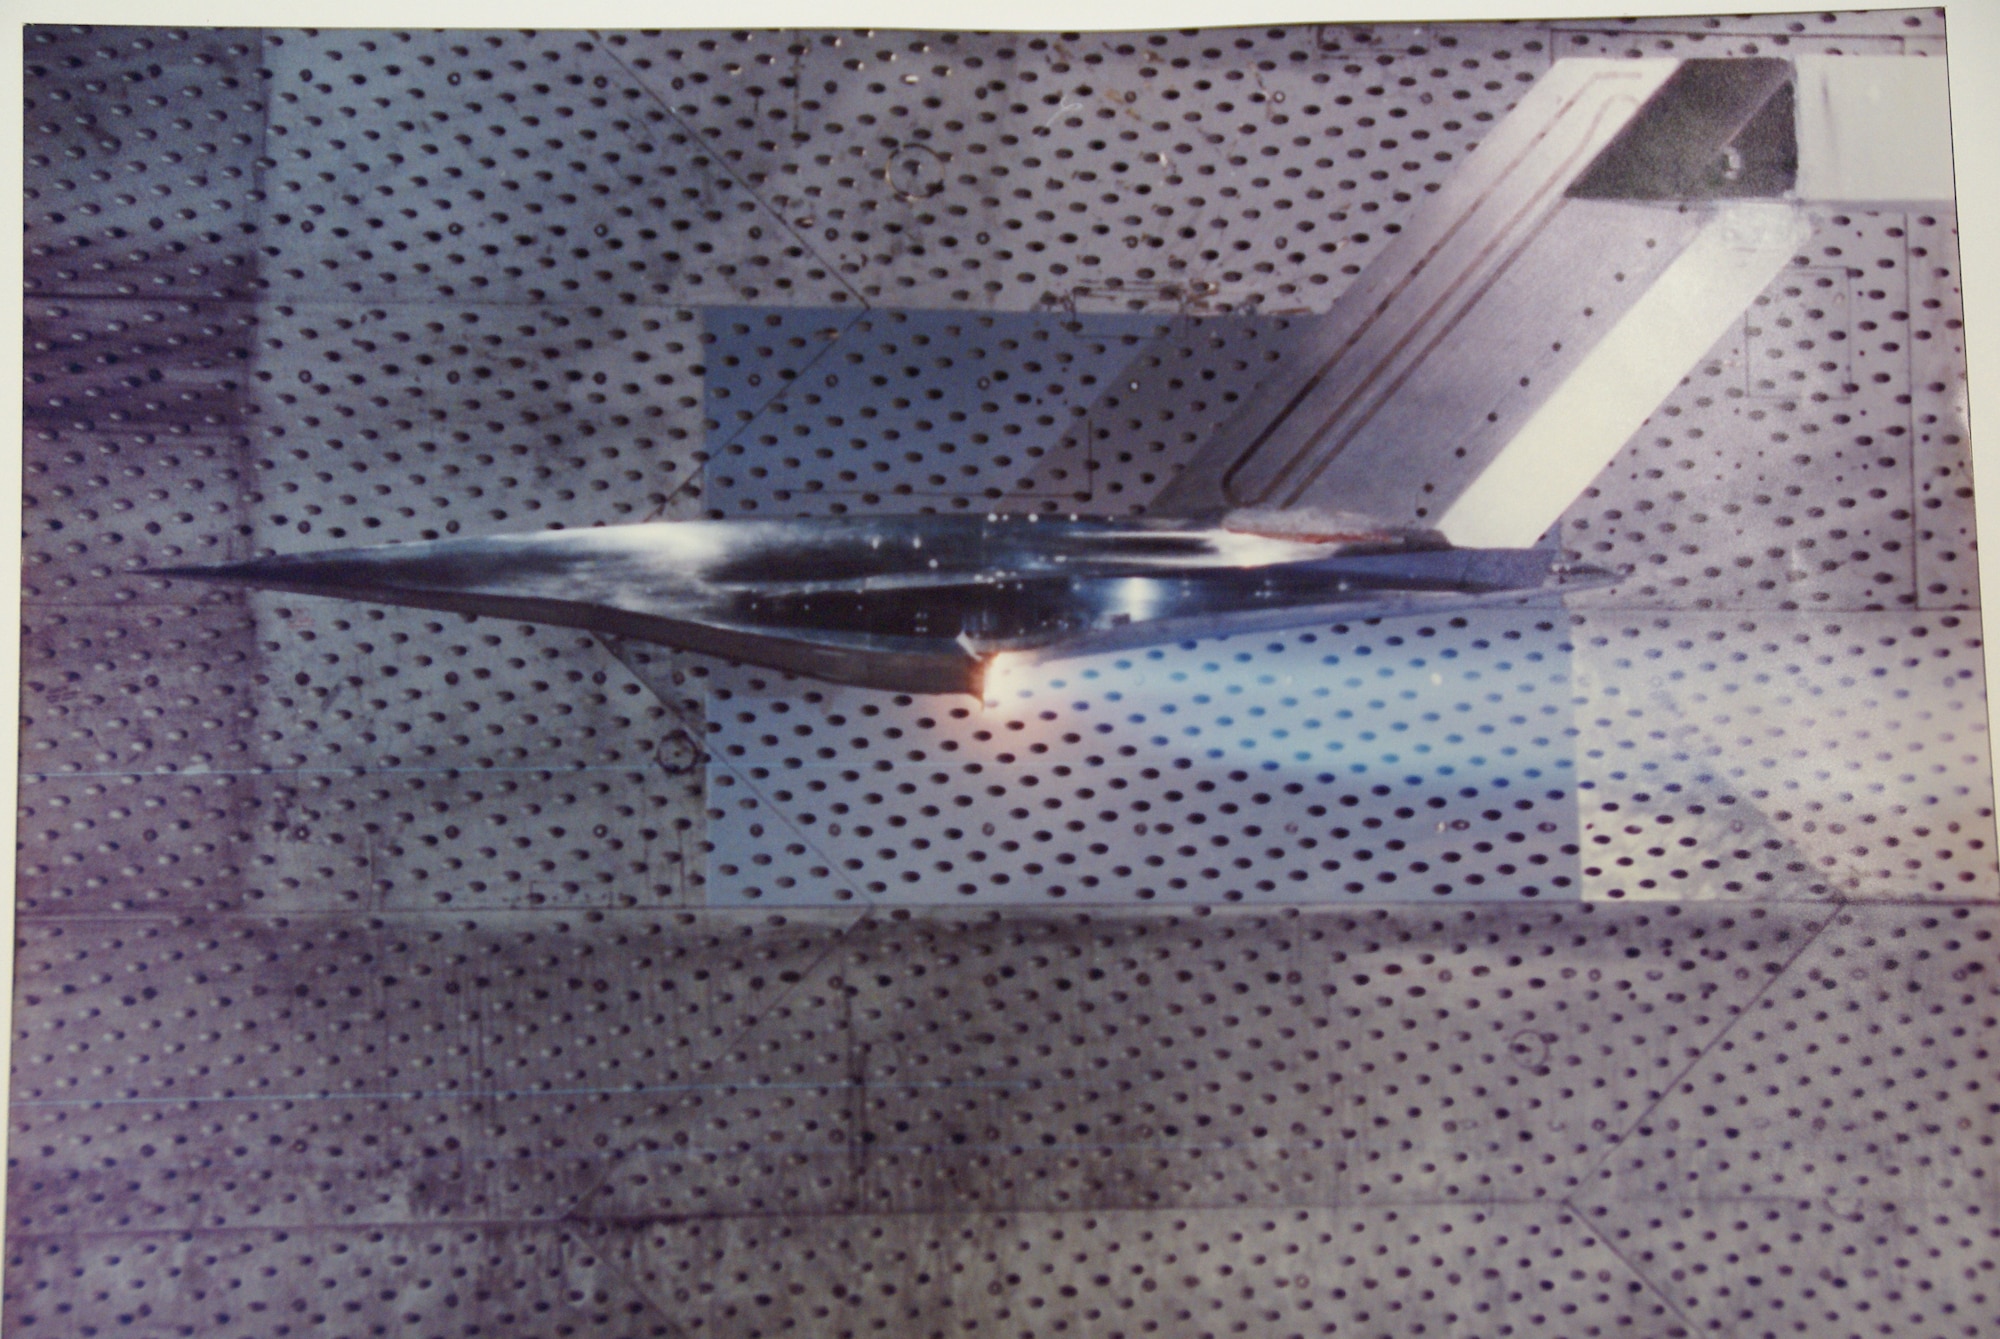 A model of the X-43 testing in one of the AEDC wind tunnels. The X-43, part of the NASA Hyper-X program, was an experimental unmanned hypersonic aircraft. It has since been replaced by the Boeing X-51 WaveRider. (U.S. Air Force photo)